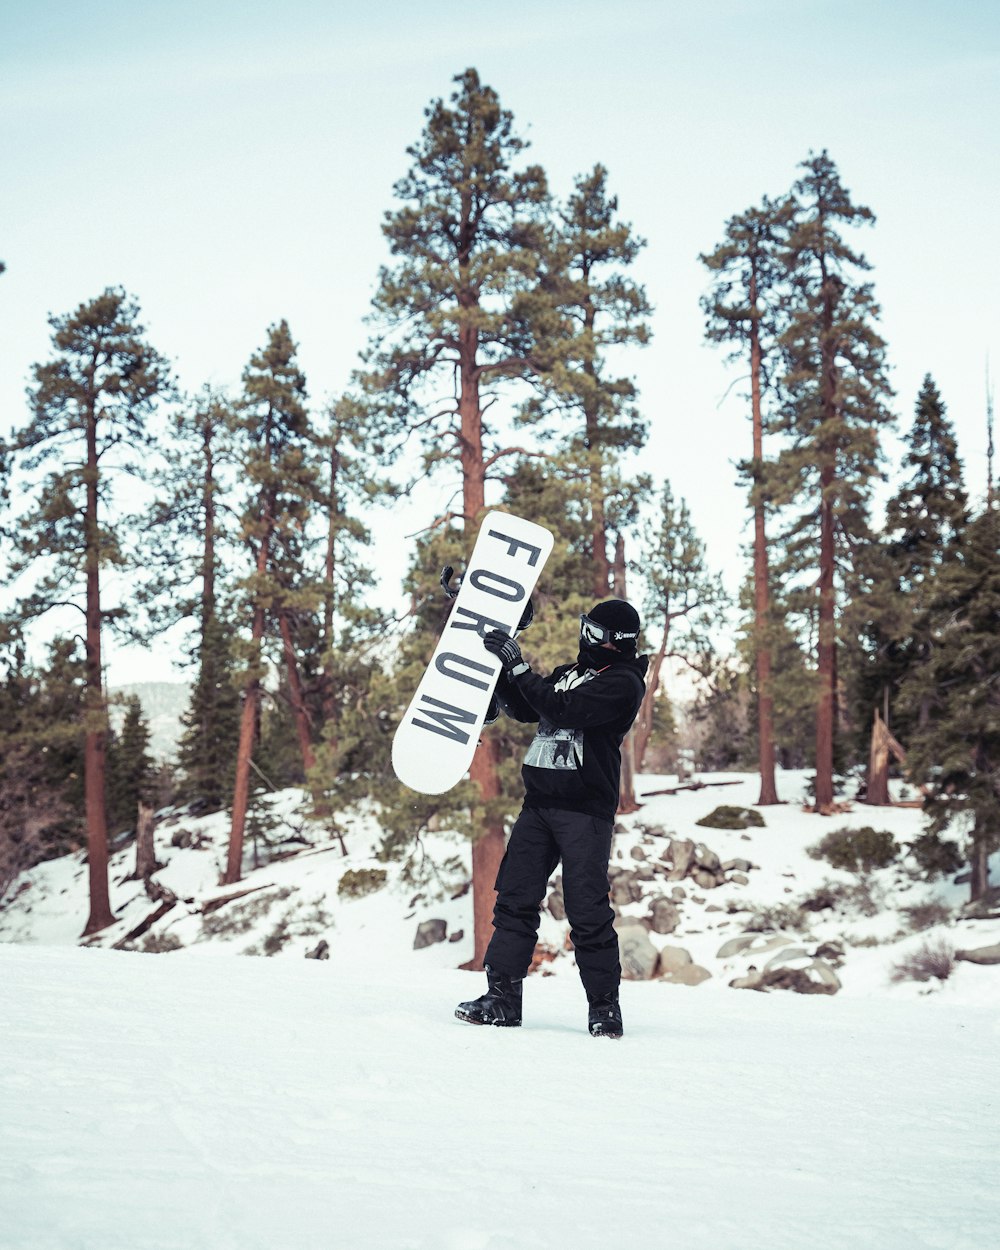 man in black jacket and black pants carrying white and black snowboard on snow covered ground